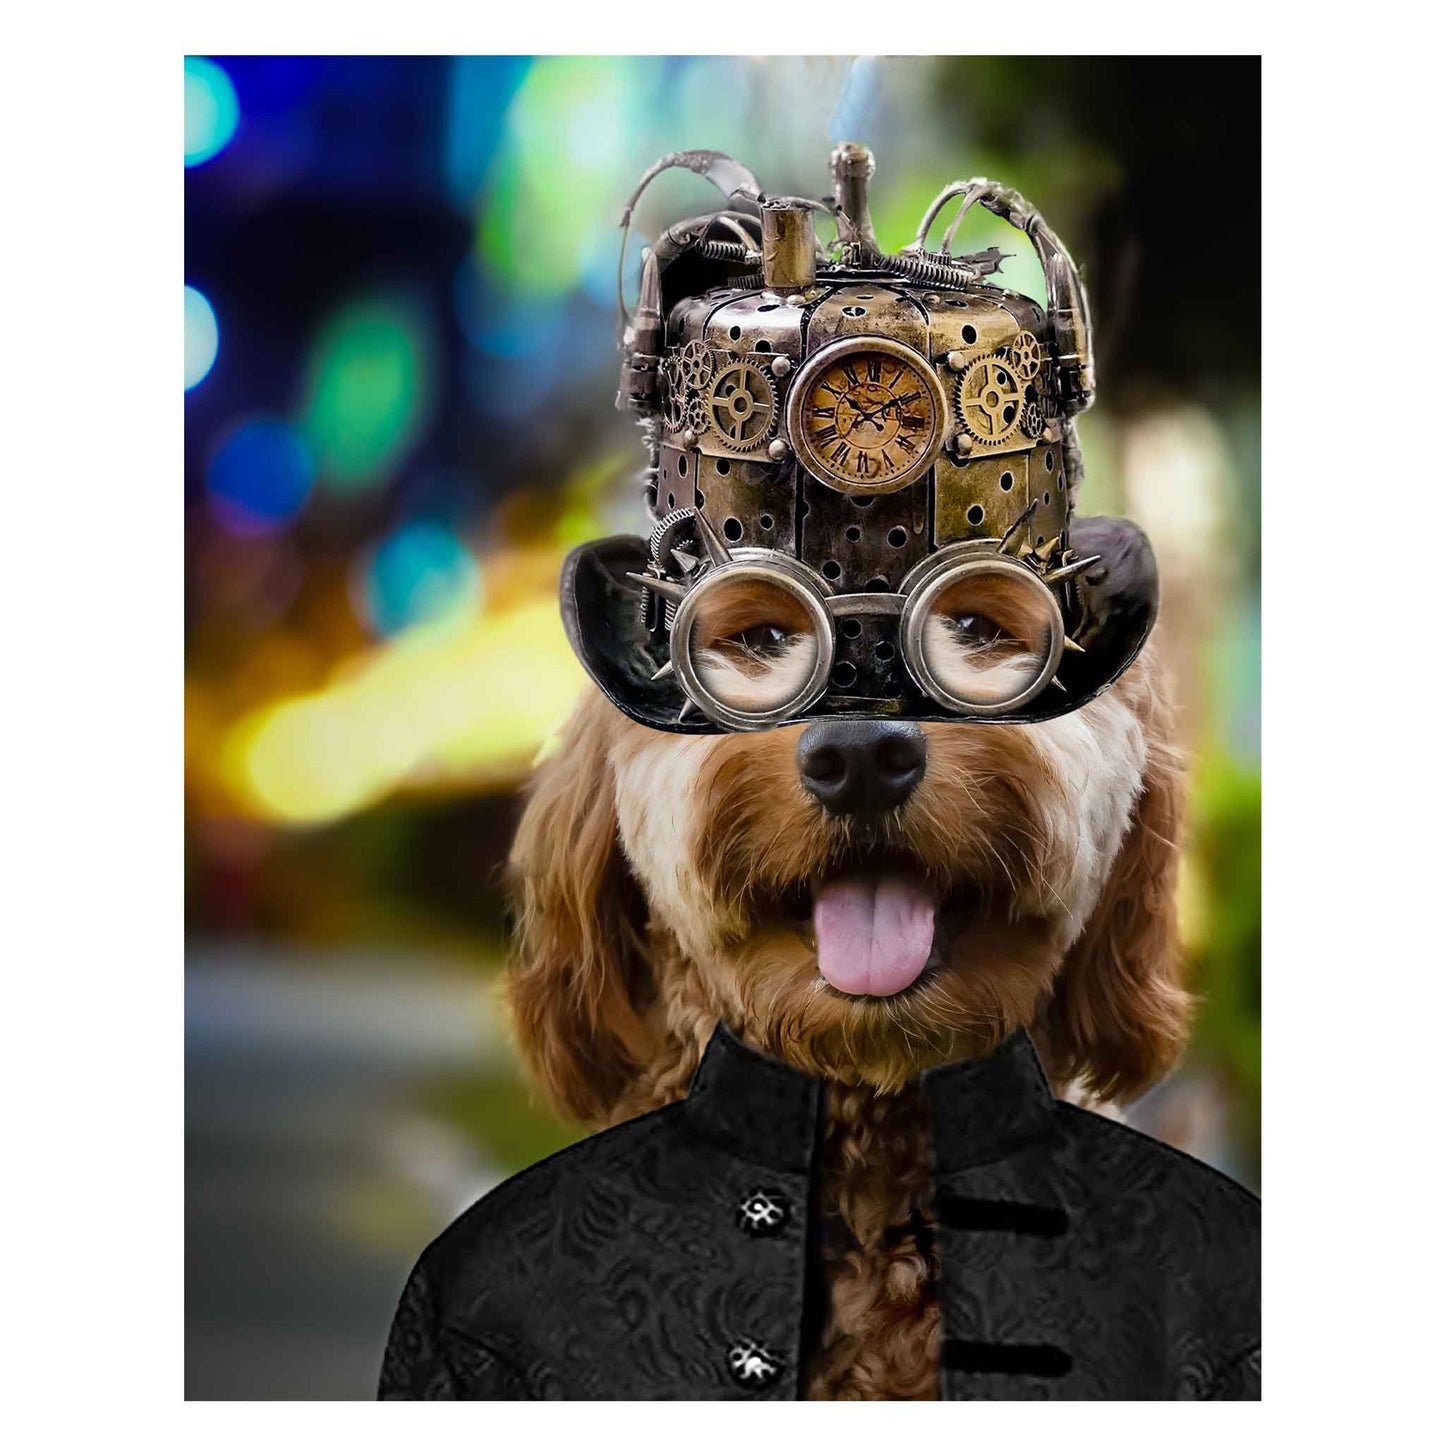 Charles Dean Carpino, photograph, funky, steampunk, dog in hat and jacket, colorful, Doodle Puppy, computer-generated background, 8x10 matted to 11x14